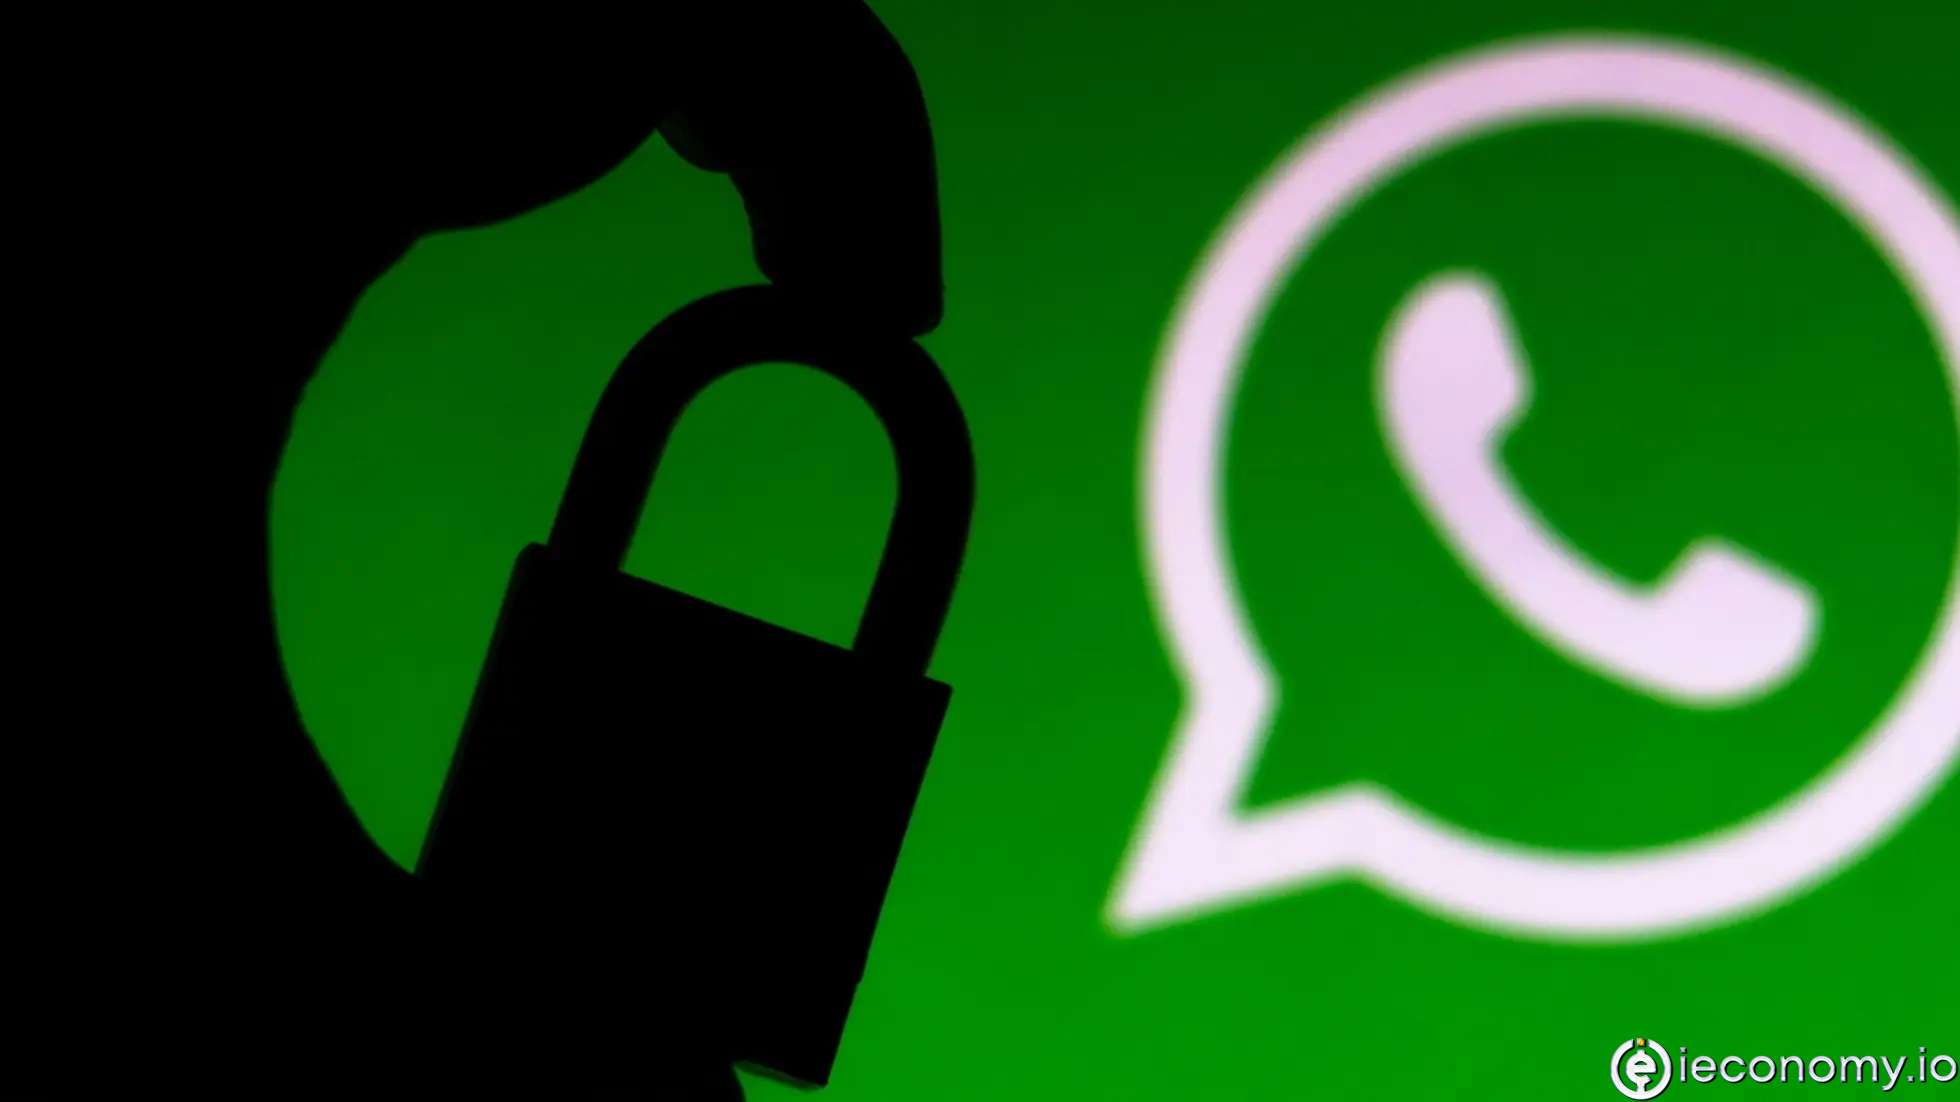 Whatsapp is promoting full encryption for the chat service